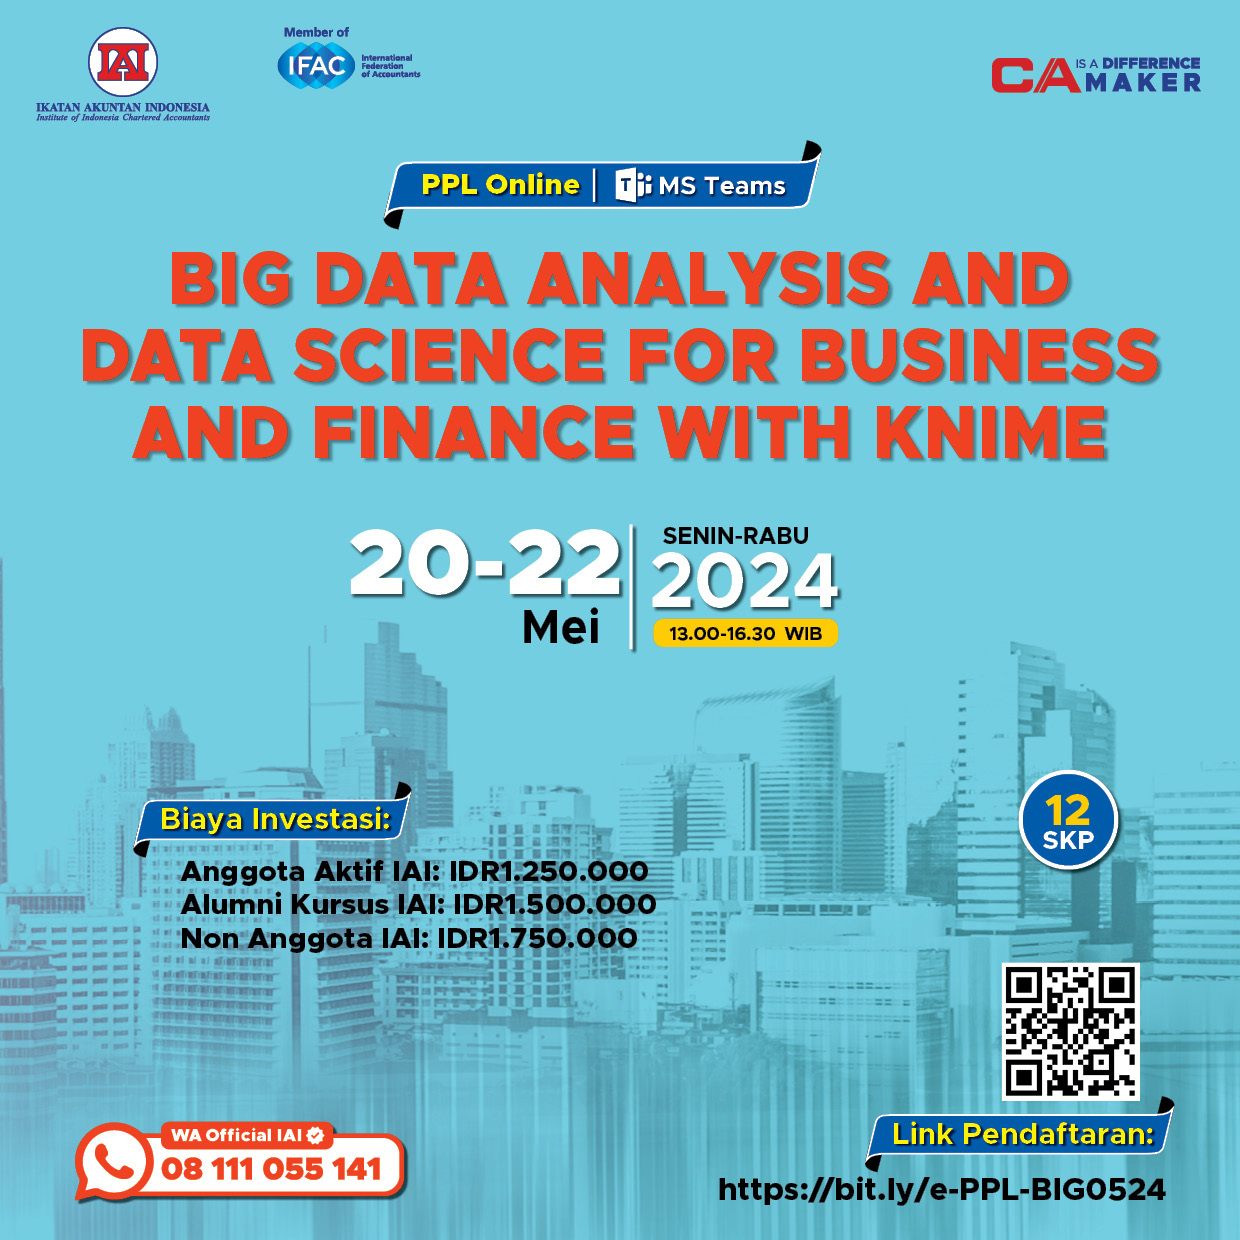 Big Data Analysis and Data Science for Business and Finance with KNIME